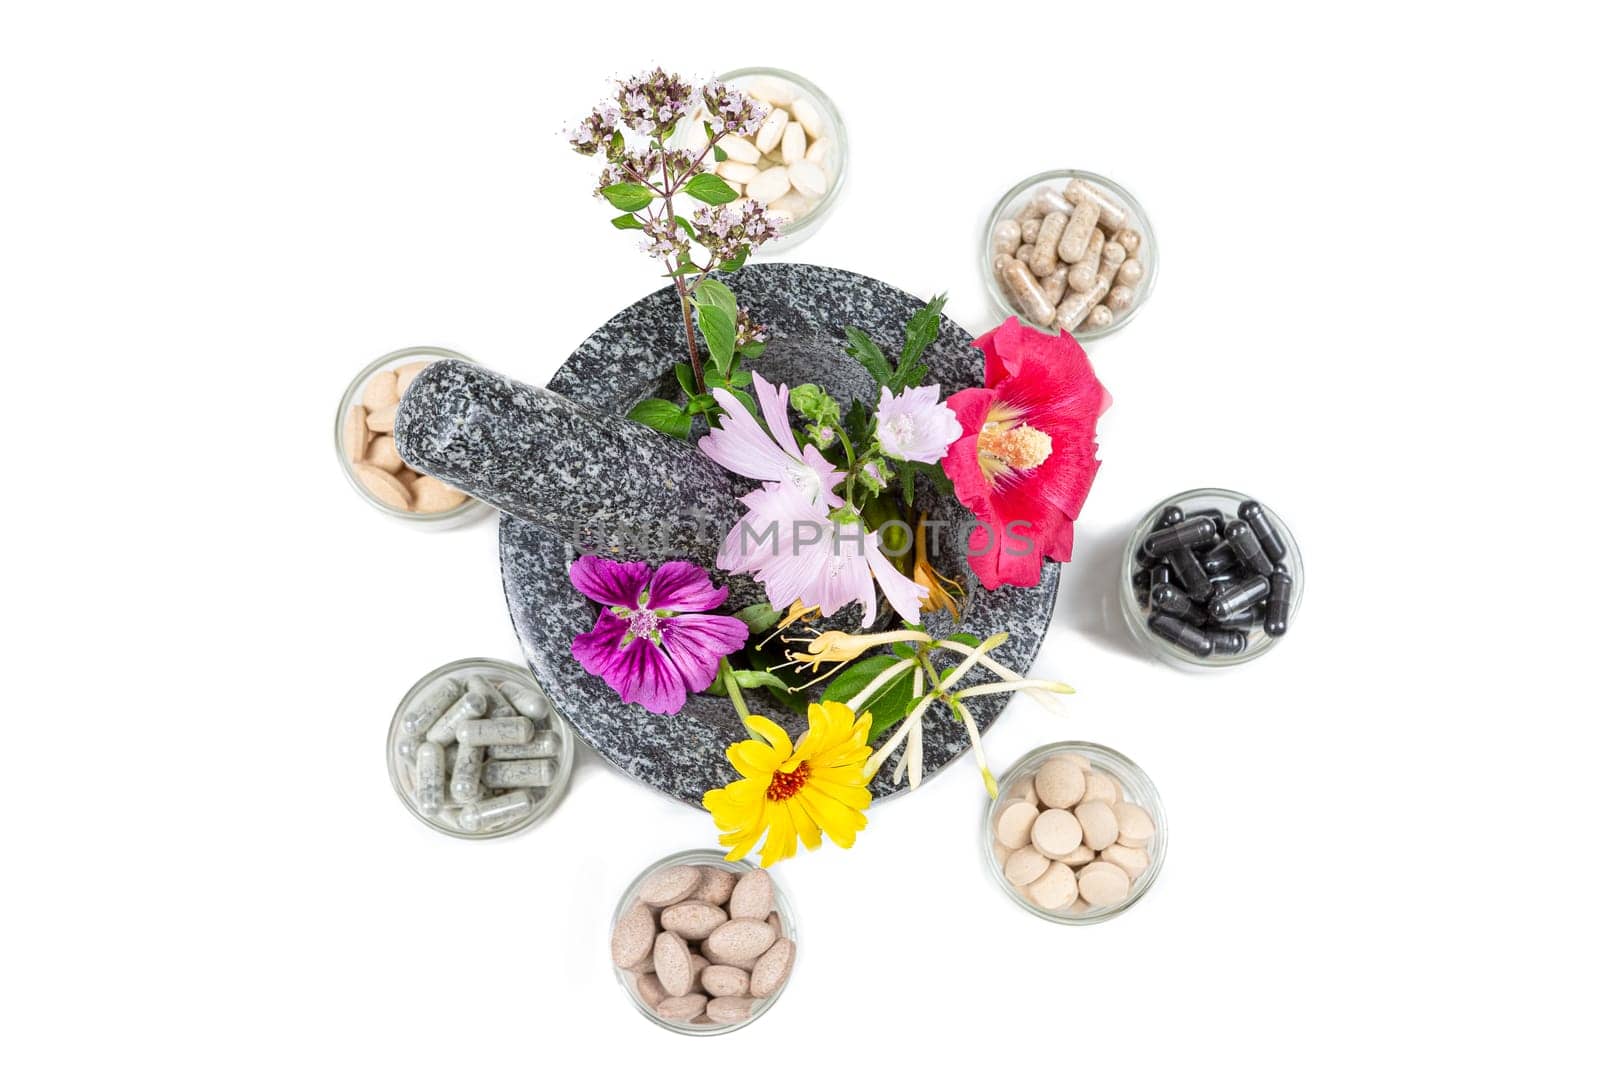 Capsules on green leaf of sage, brown jar, wooden mortar with a sprig of mint, flowers of chamomile, clover, oregano, mignonette, elecampane isolated on white background